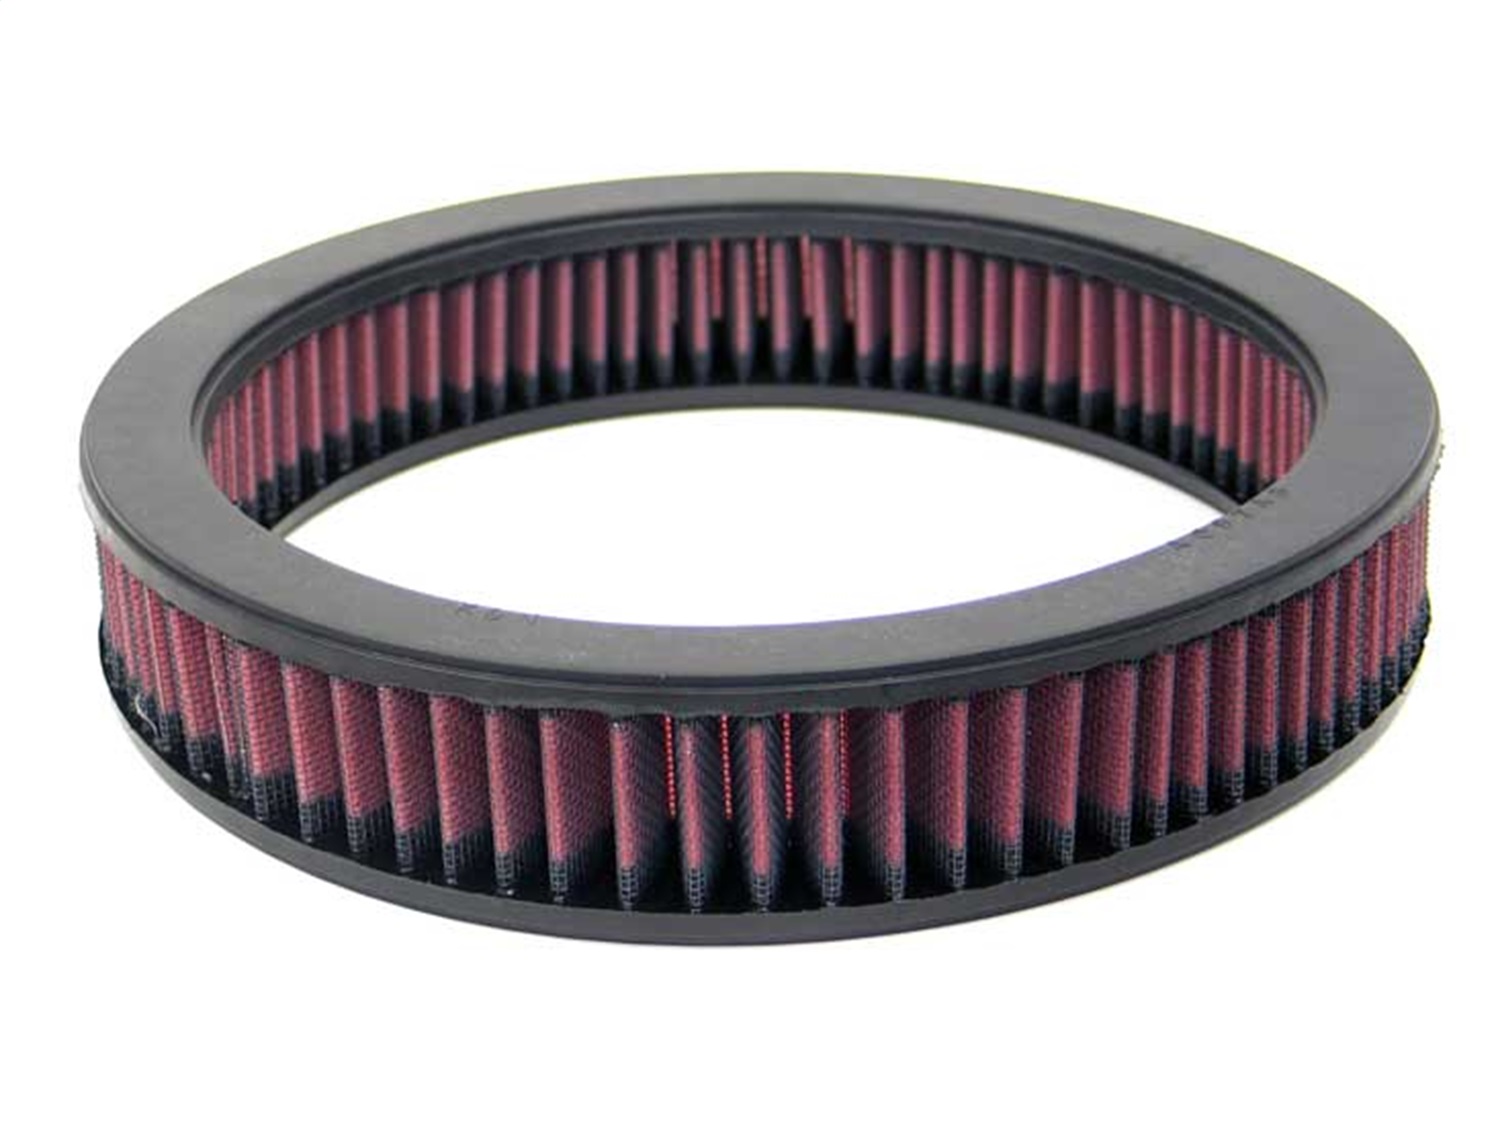 K&N Filters K&N Filters E-2740 Air Filter Fits 76-83 Accord Civic